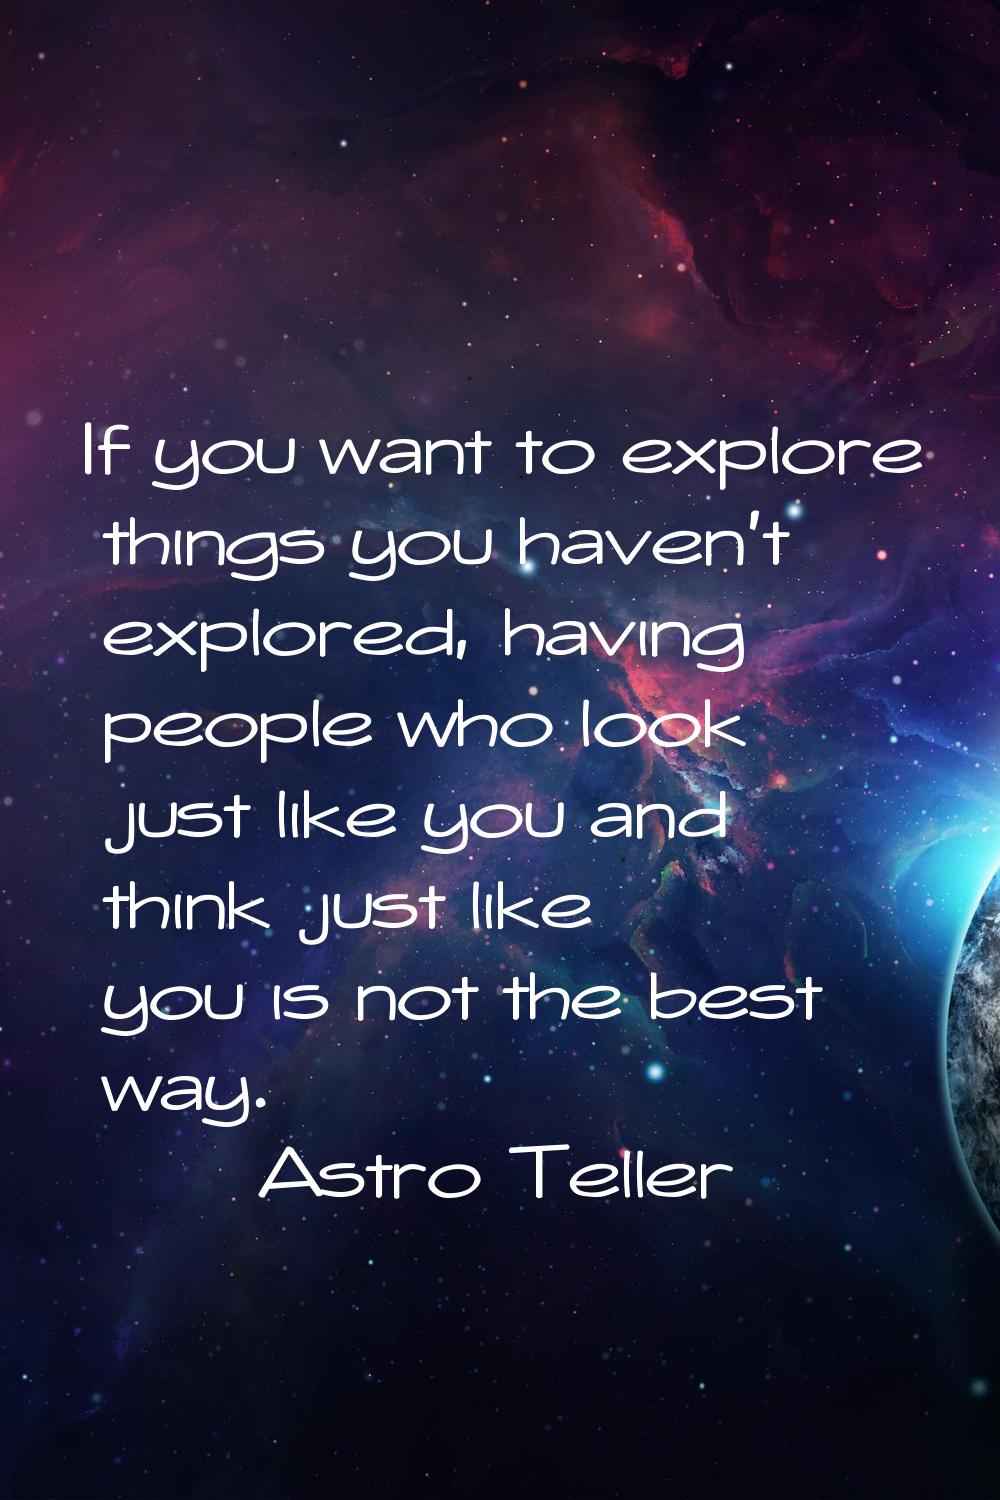 If you want to explore things you haven't explored, having people who look just like you and think 